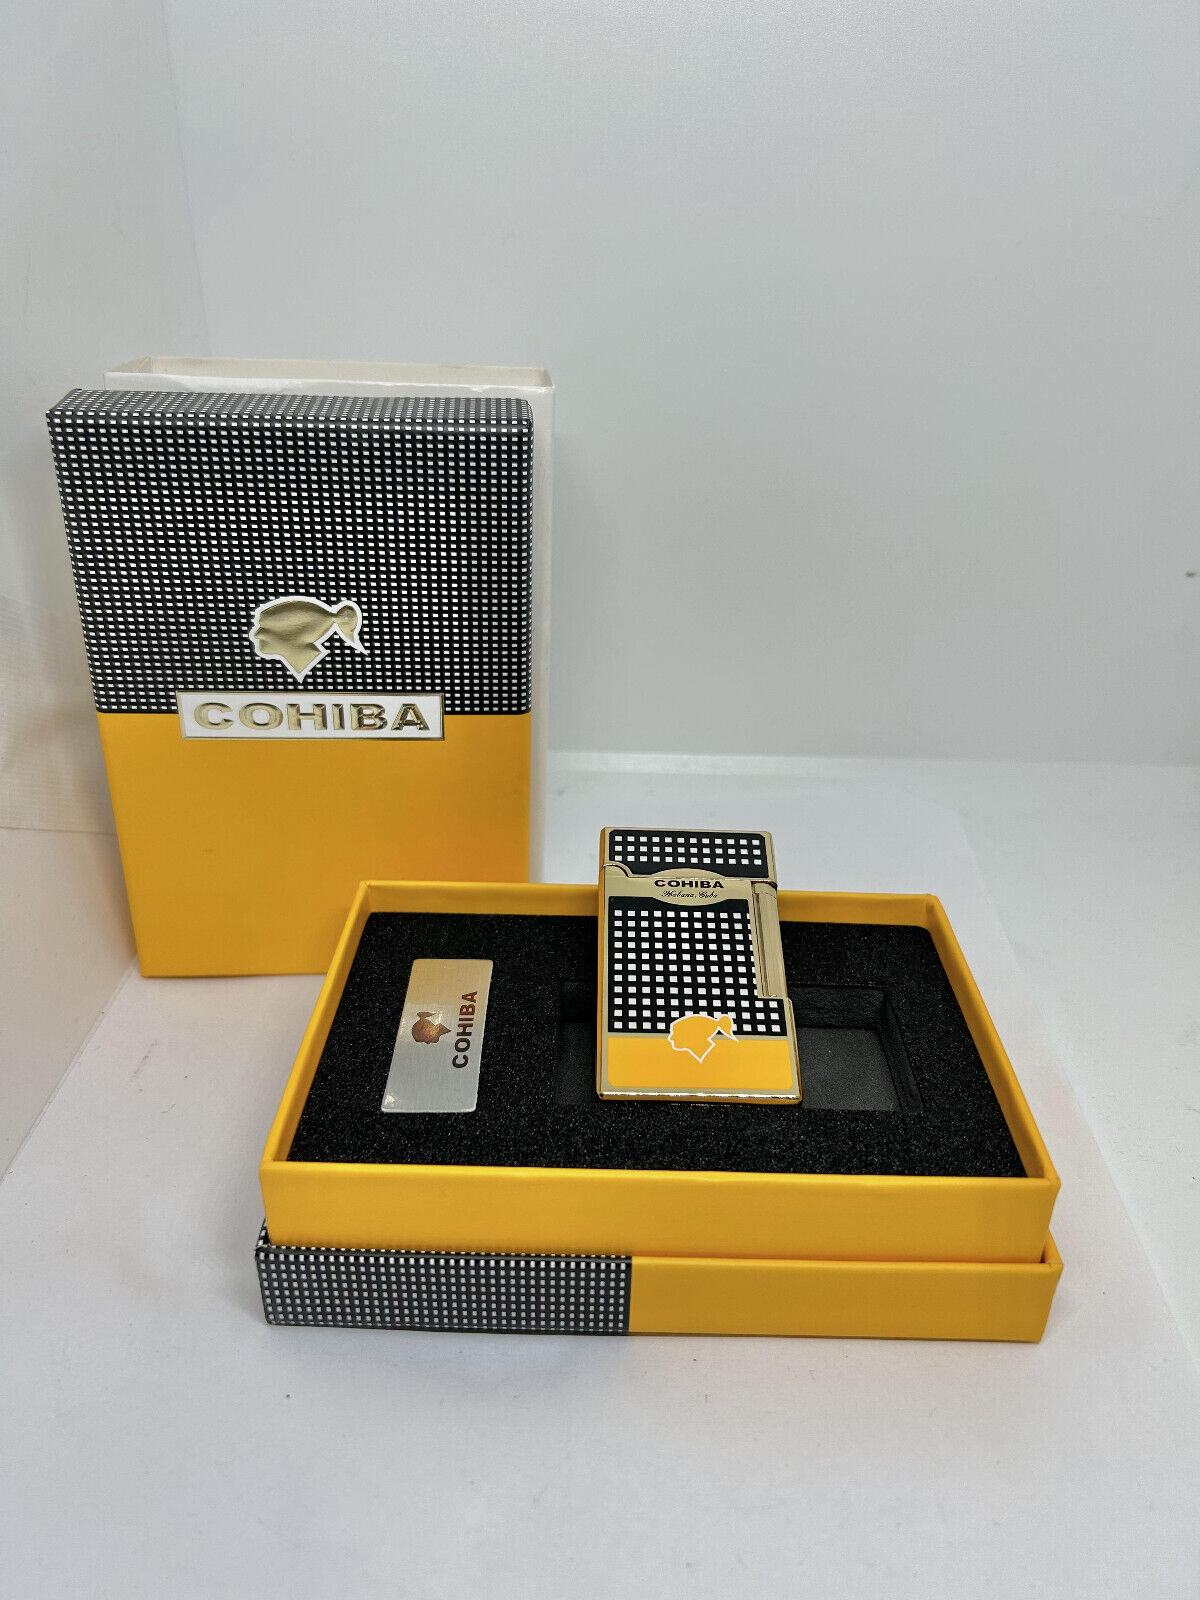 Amazing Gold plated Collectable Cohiba Vintage gas lighter old school in a box